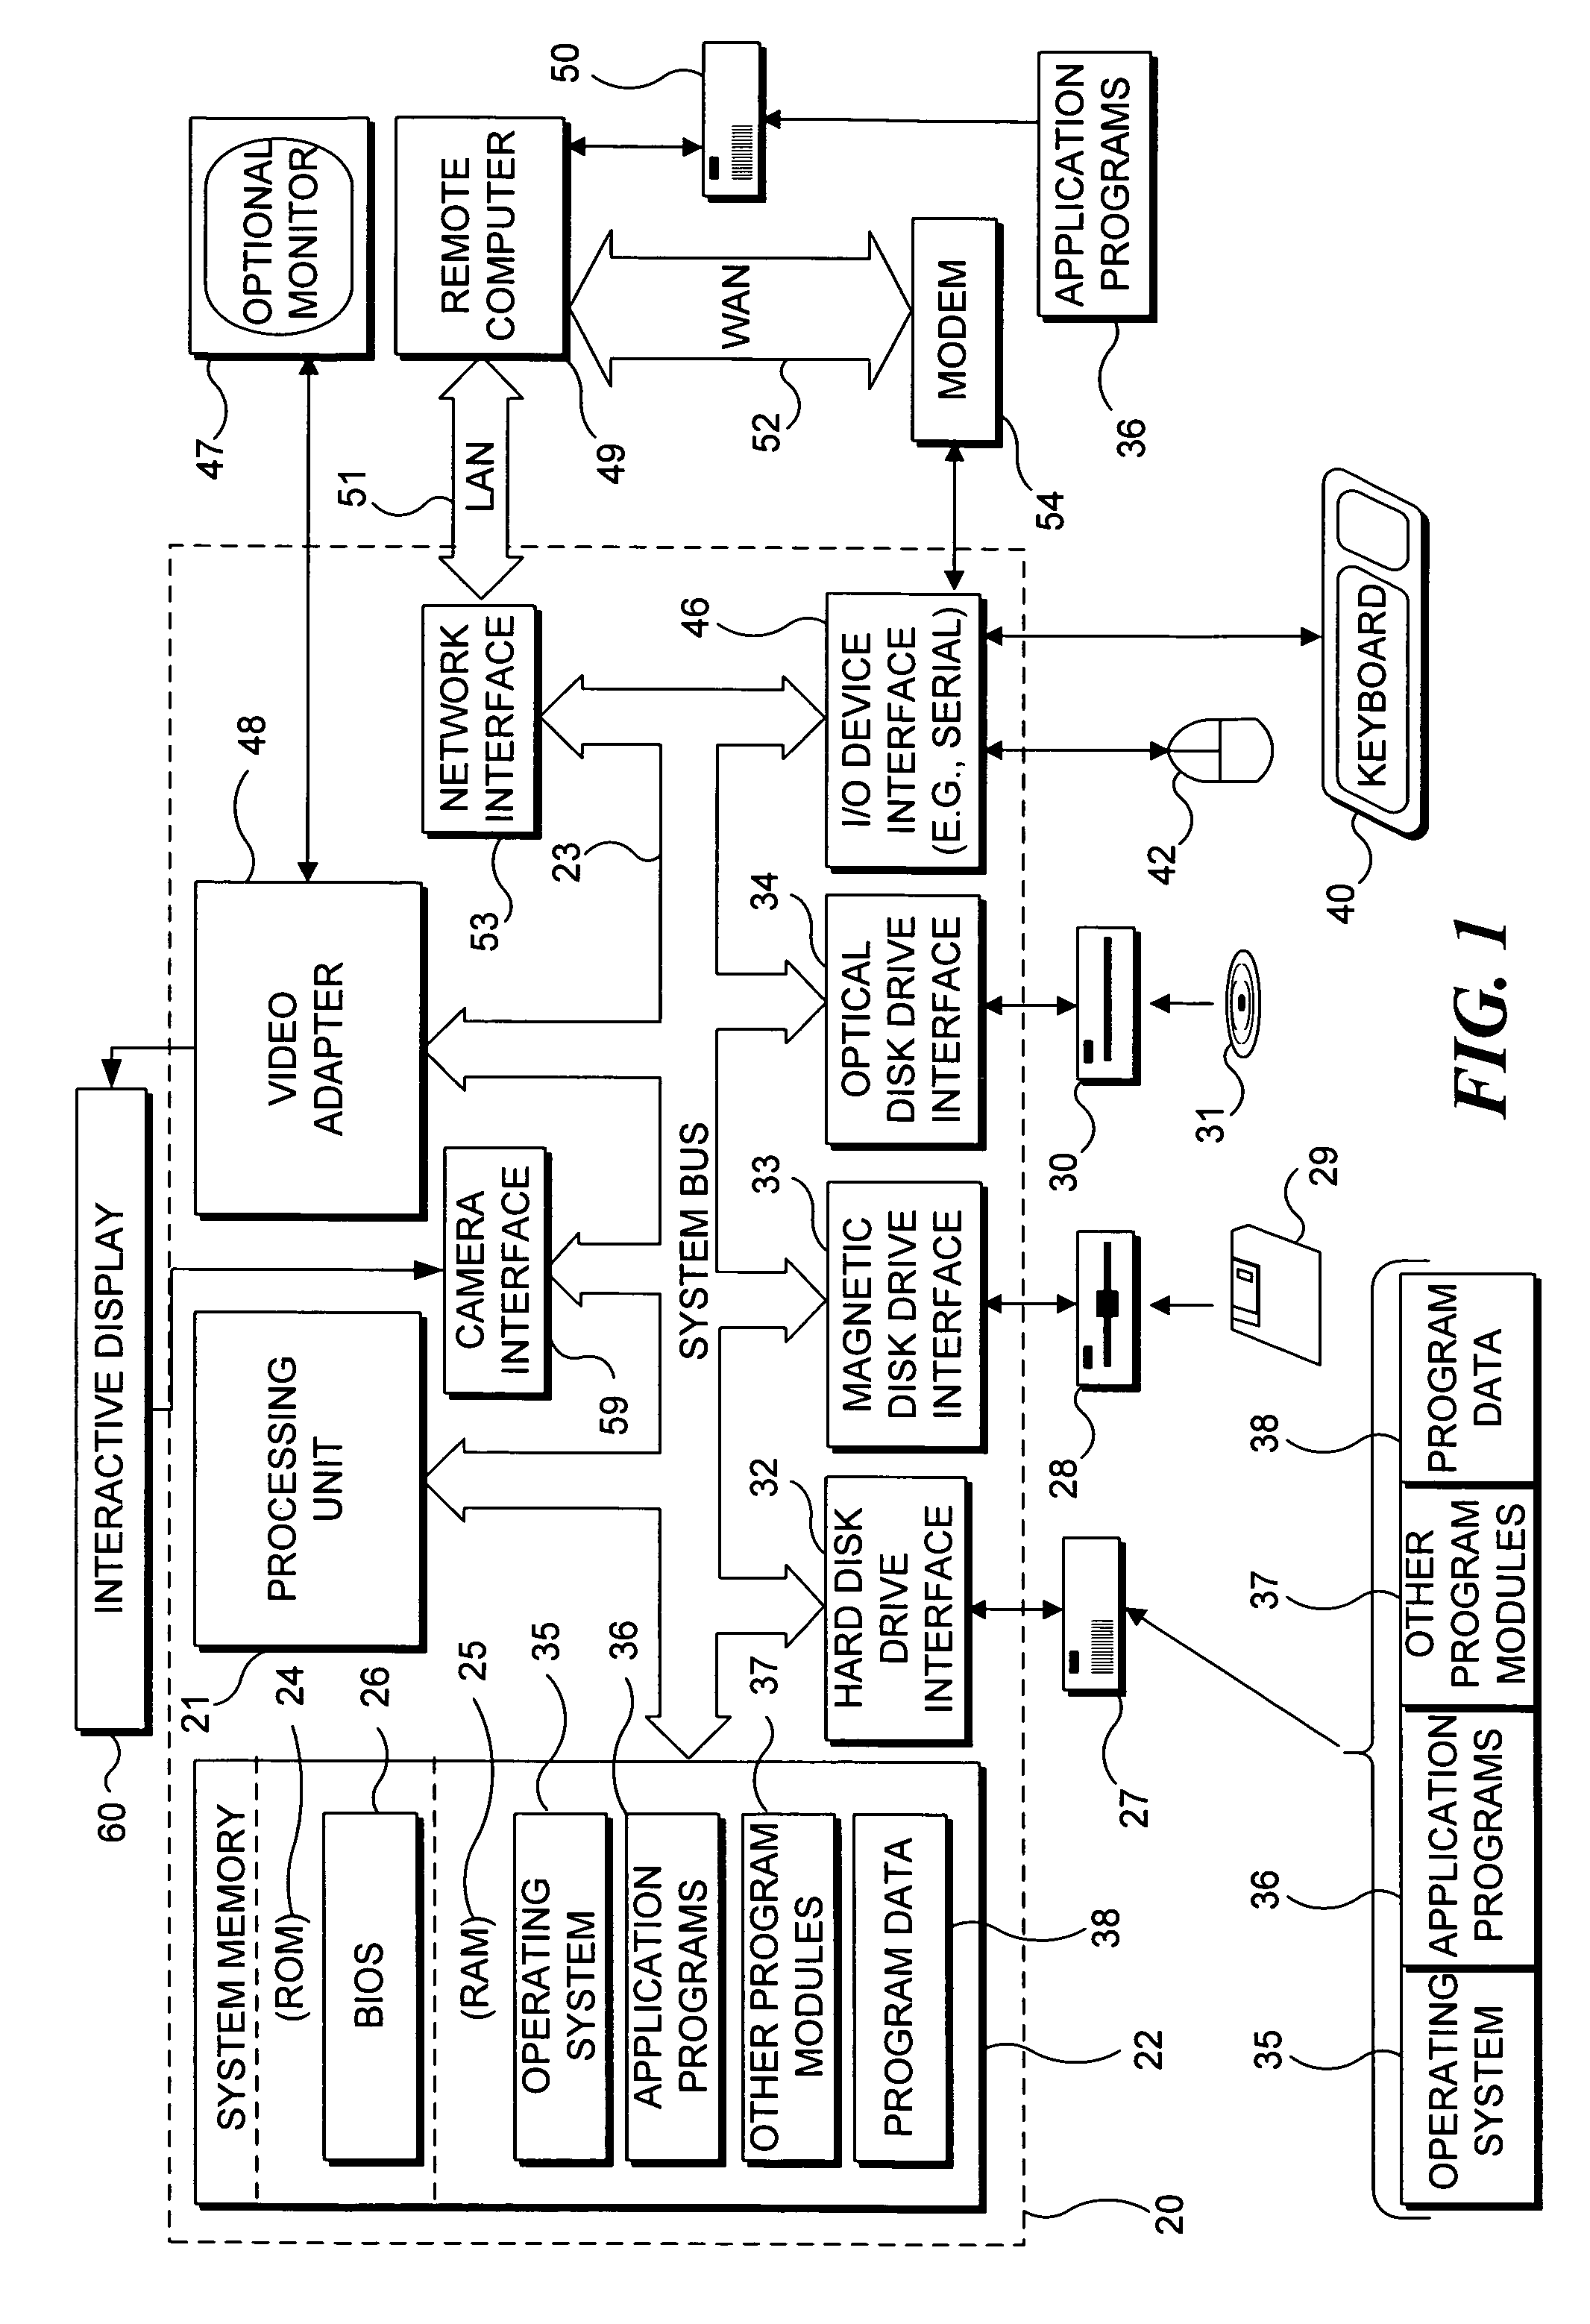 System and method for reducing latency in display of computer-generated graphics